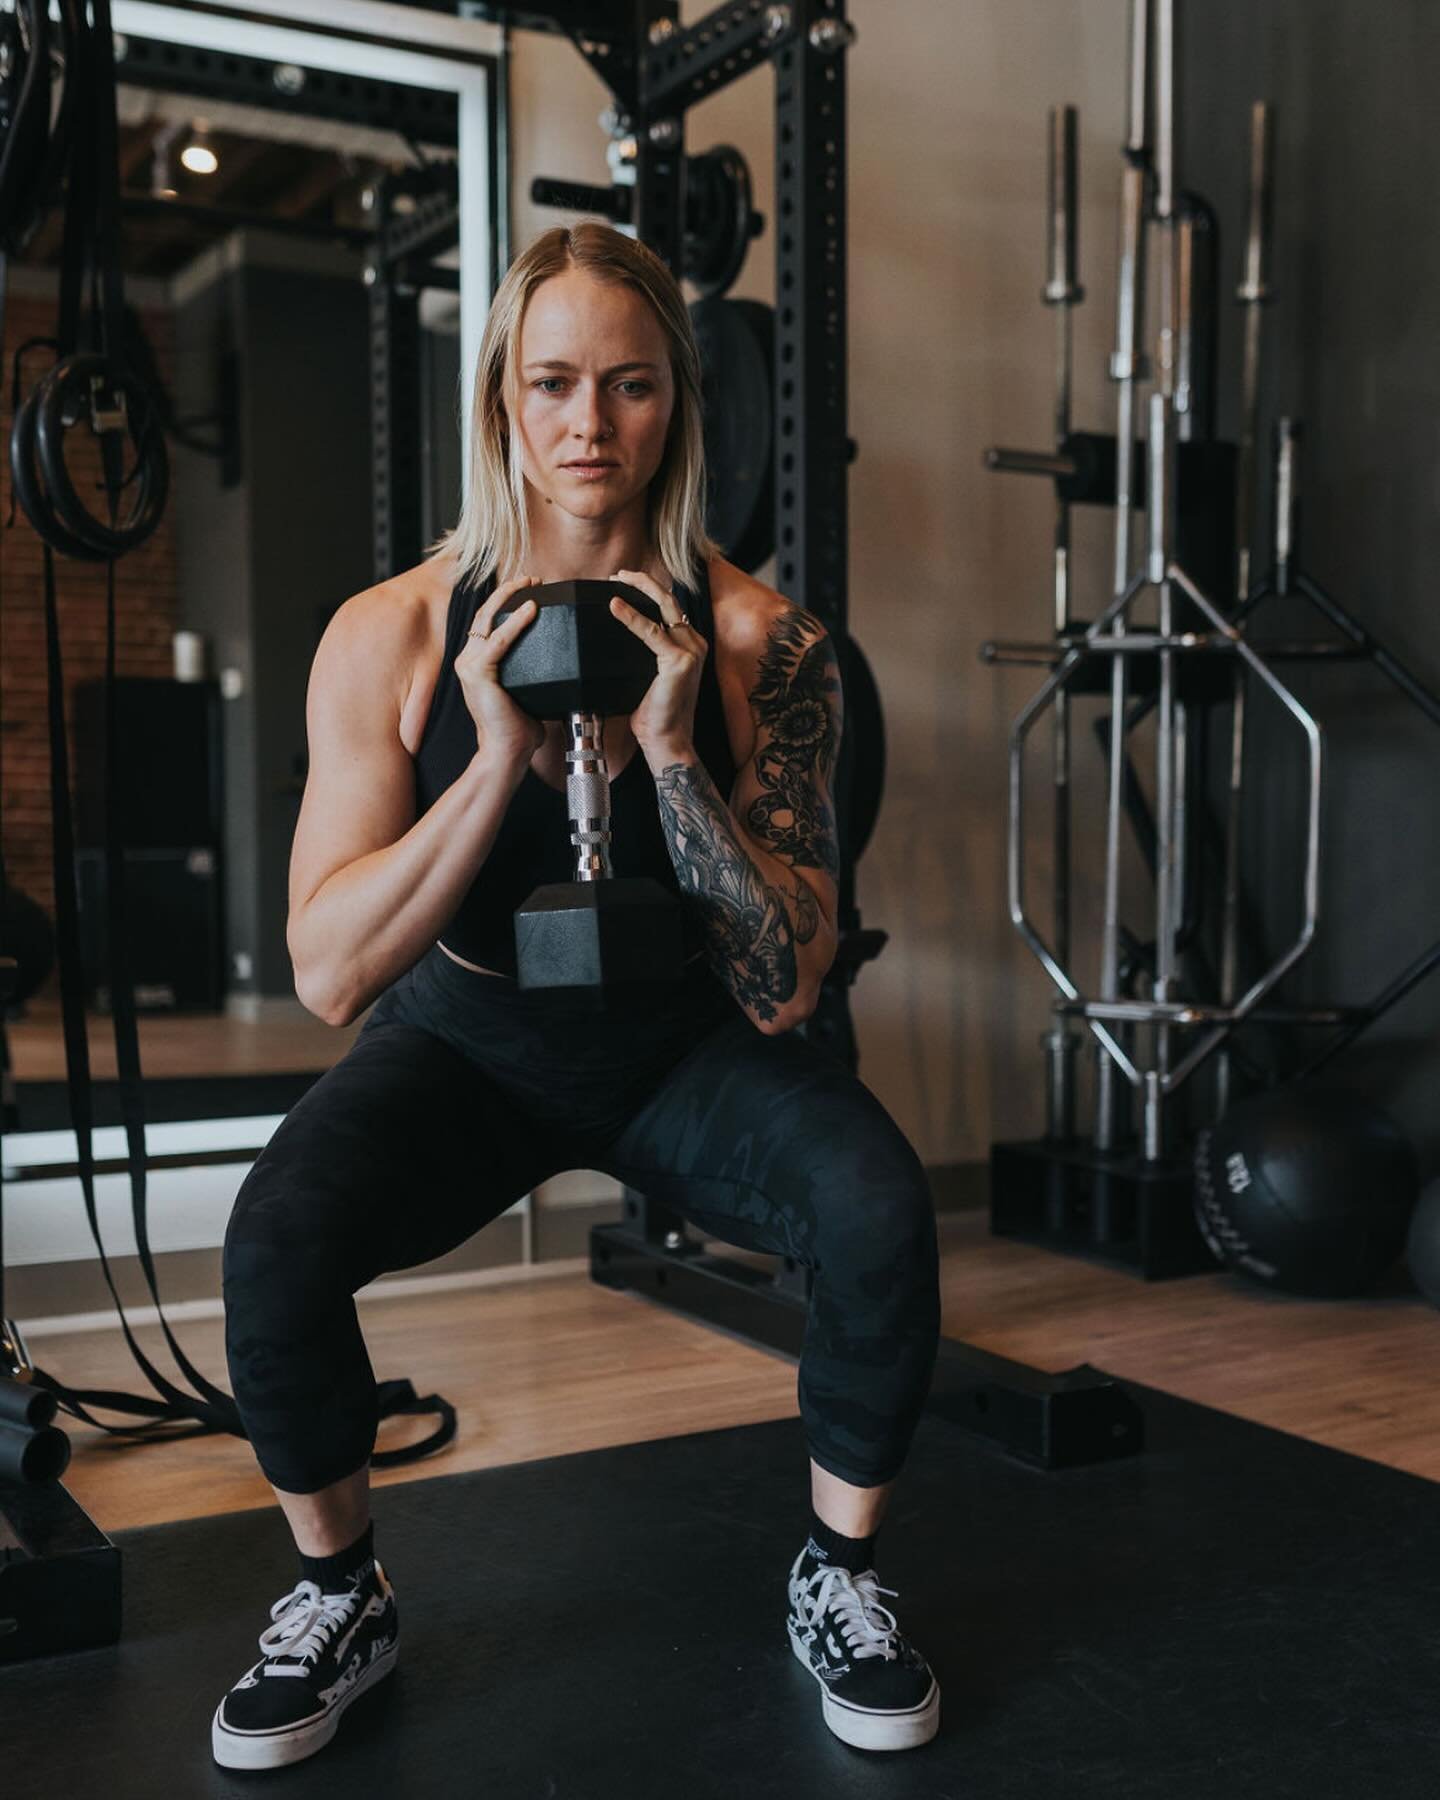 Join us in wishing Coach @jorgiponder a very happy birthday! A few awesome things that you might not have known about Jorgi: 

1. the incredible workouts you are put through in studio every week at KALO are designed by this BA babe!
2. she used to be